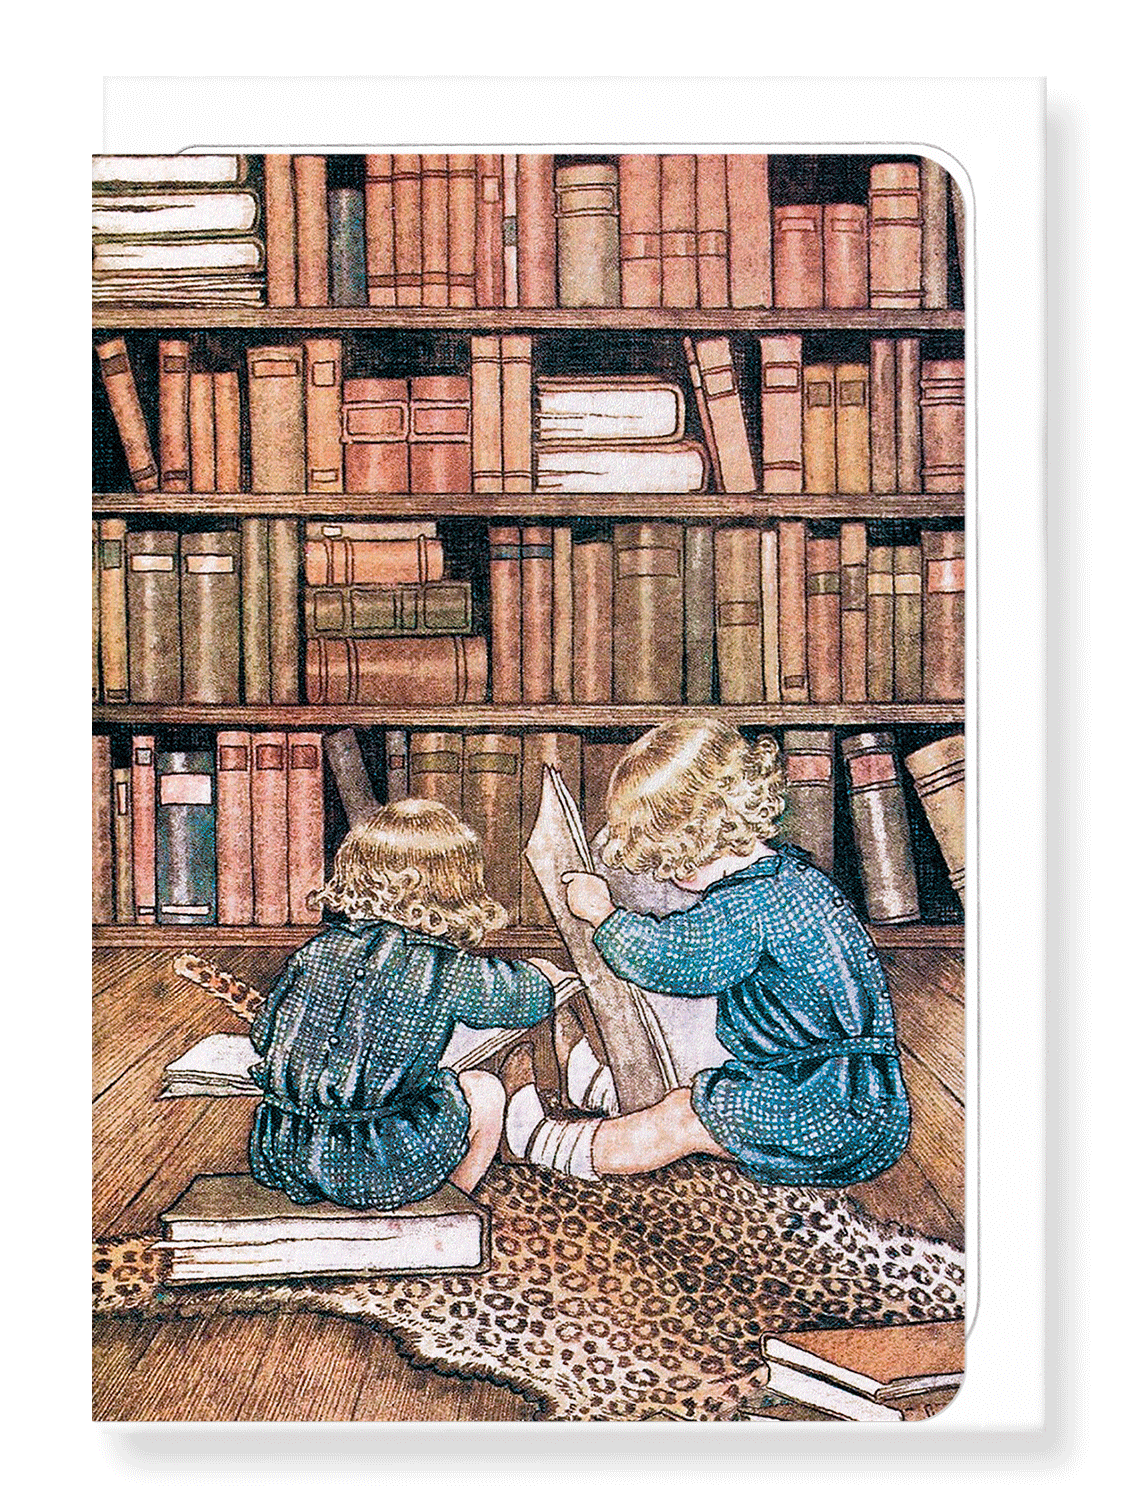 Ezen Designs - Bookworms by outhwaite - Greeting Card - Front